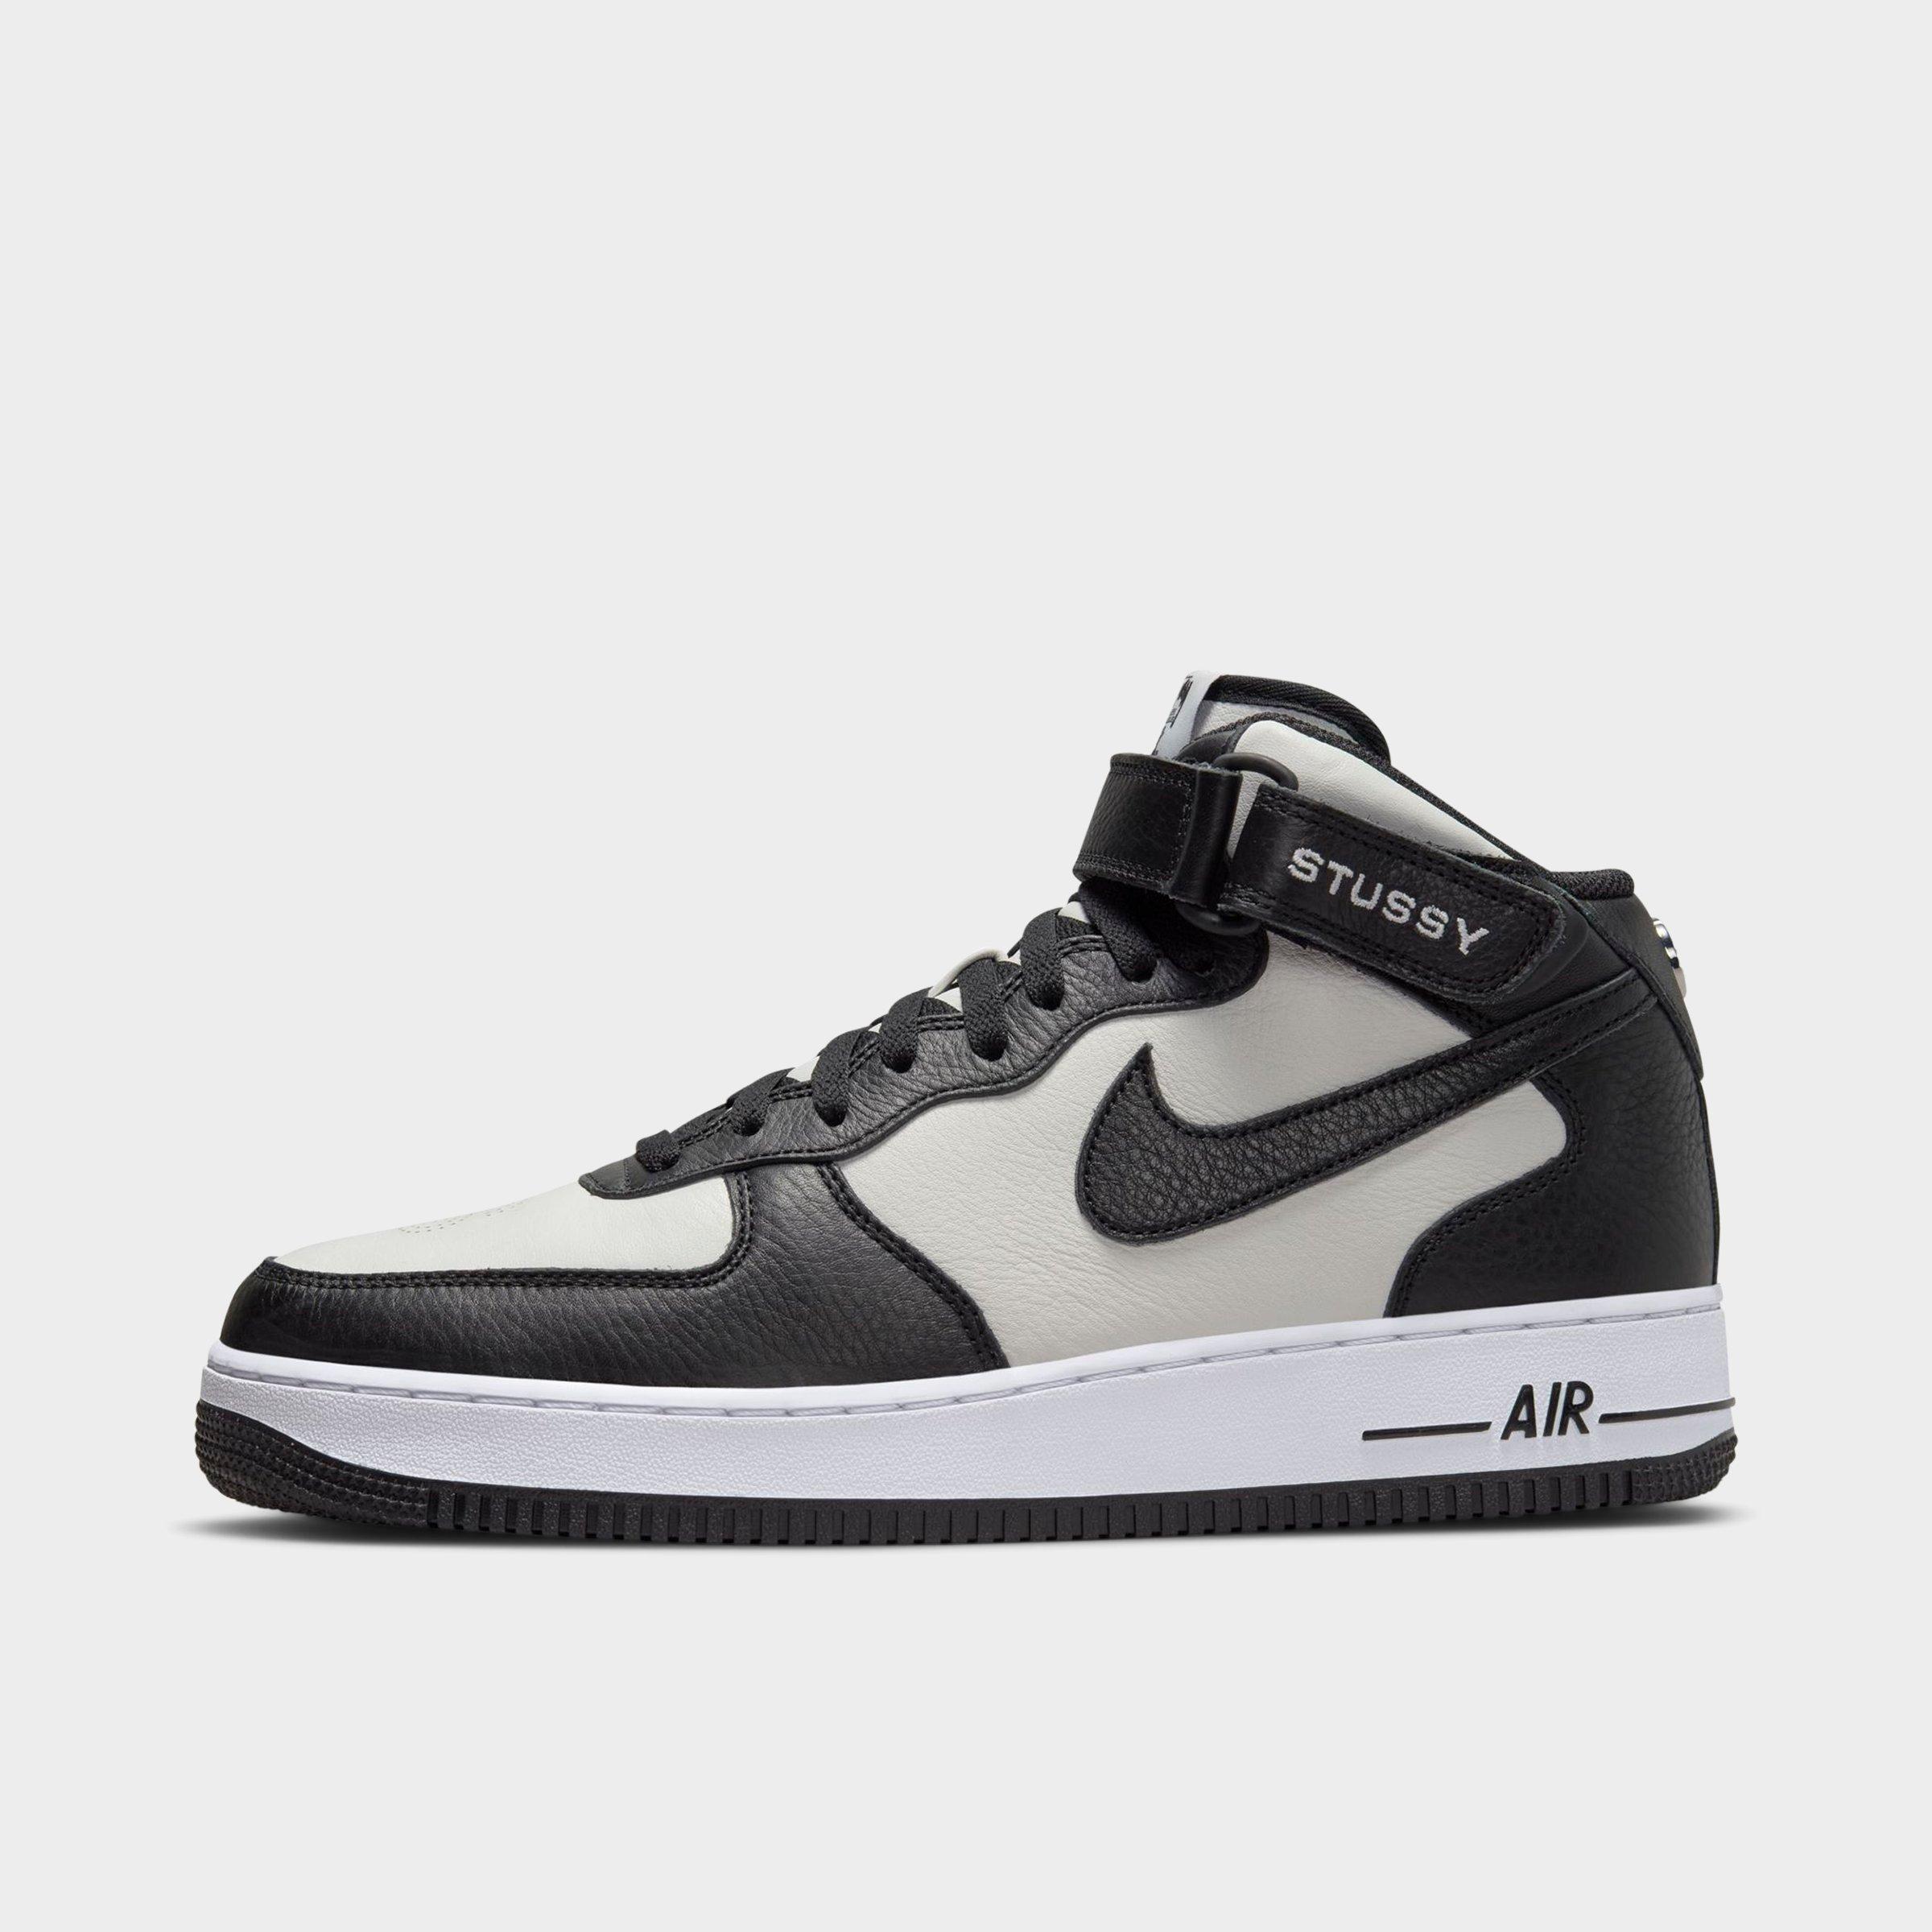 Mens Nike x Stuessy Air Force 1 07 Mid Casual Shoes